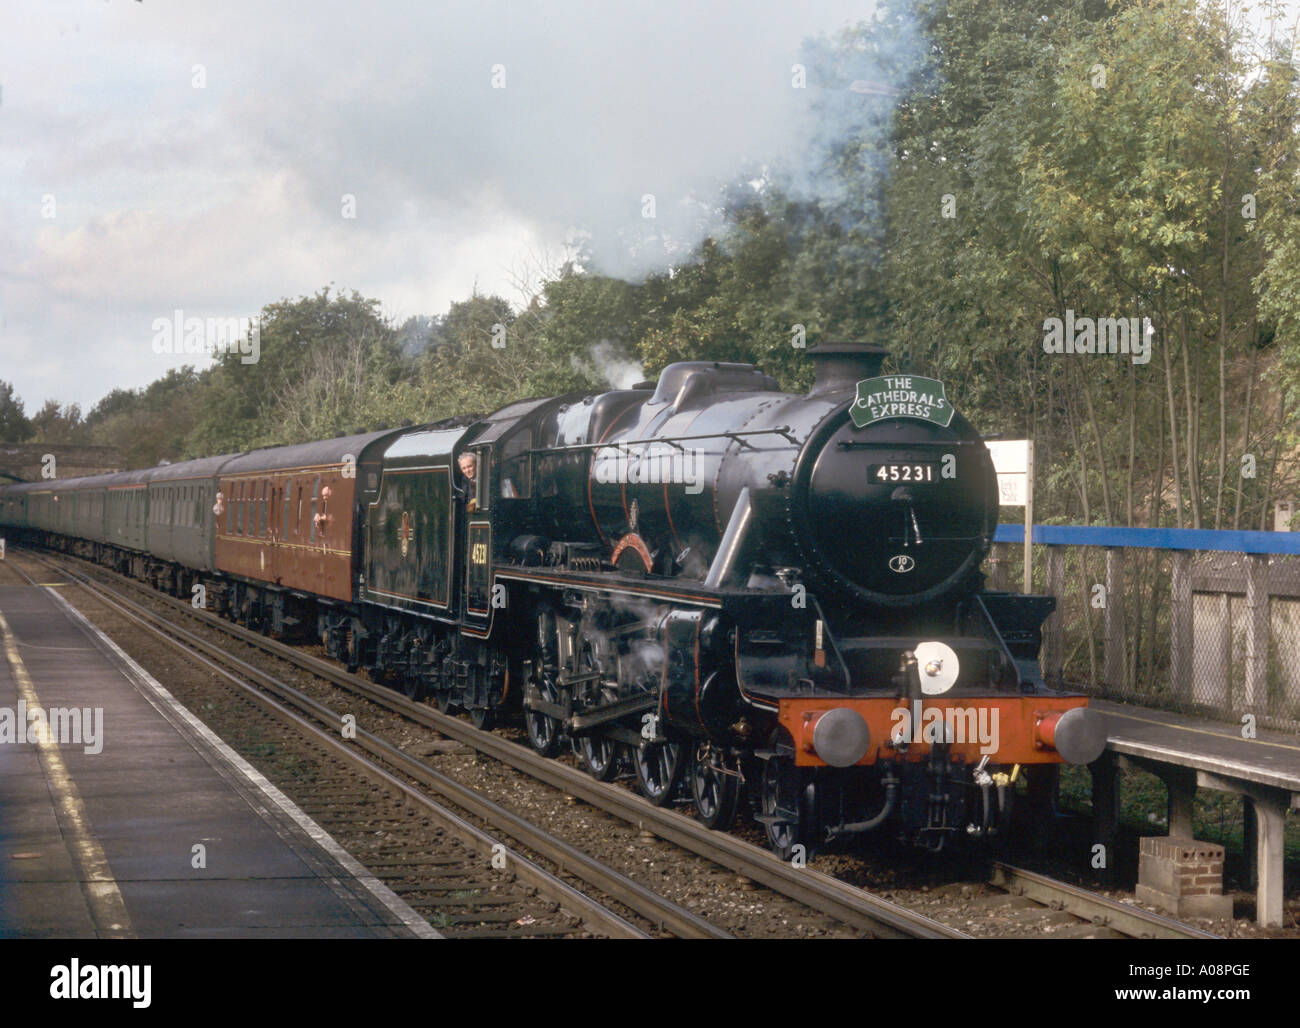 Steam Train at Bearsted, Kent, England. Stock Photo